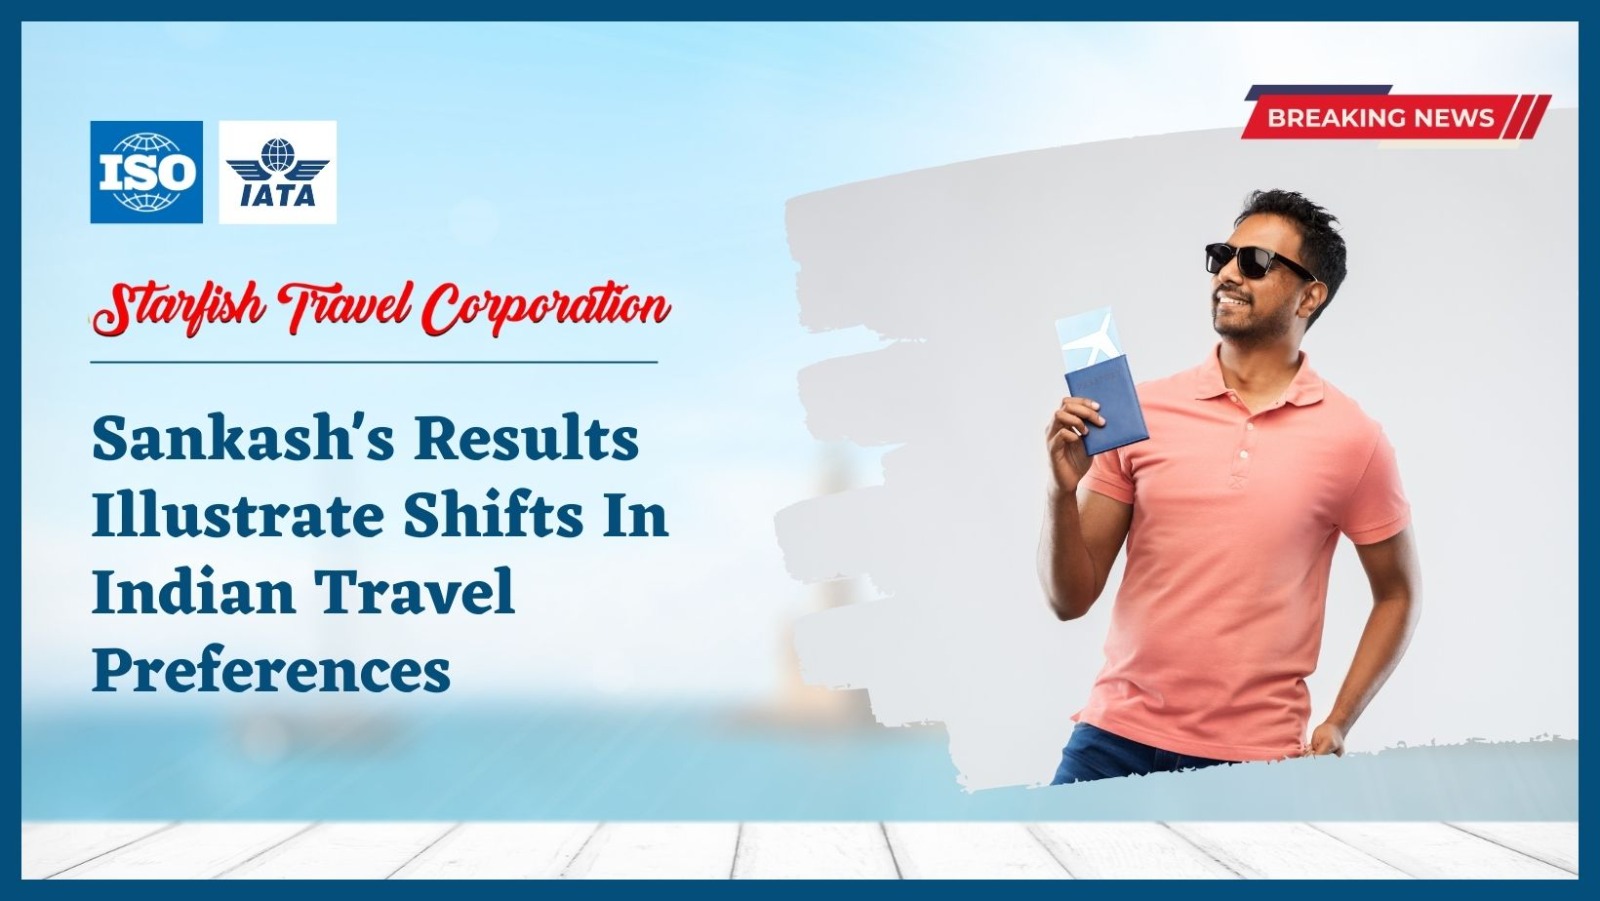 Sankash’s Results Illustrate Shifts In Indian Travel Preferences